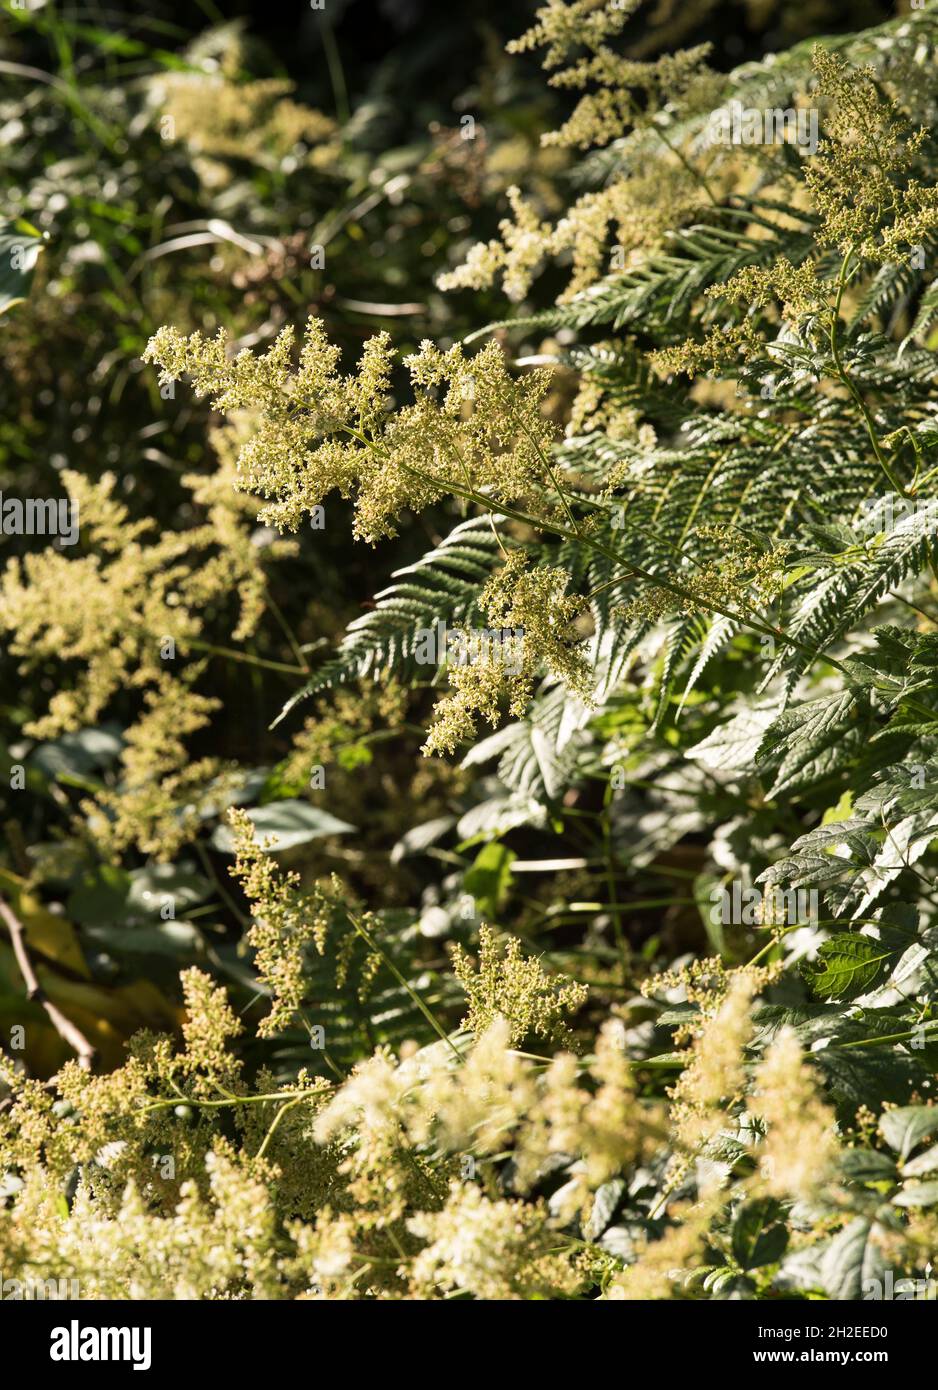 Sunlight picks out the off-white Astilbe 'Deutschland' Japonica hybrid, in the shadow under a tall tree. AKA False Goat's Beard or False Spirea. Stock Photo